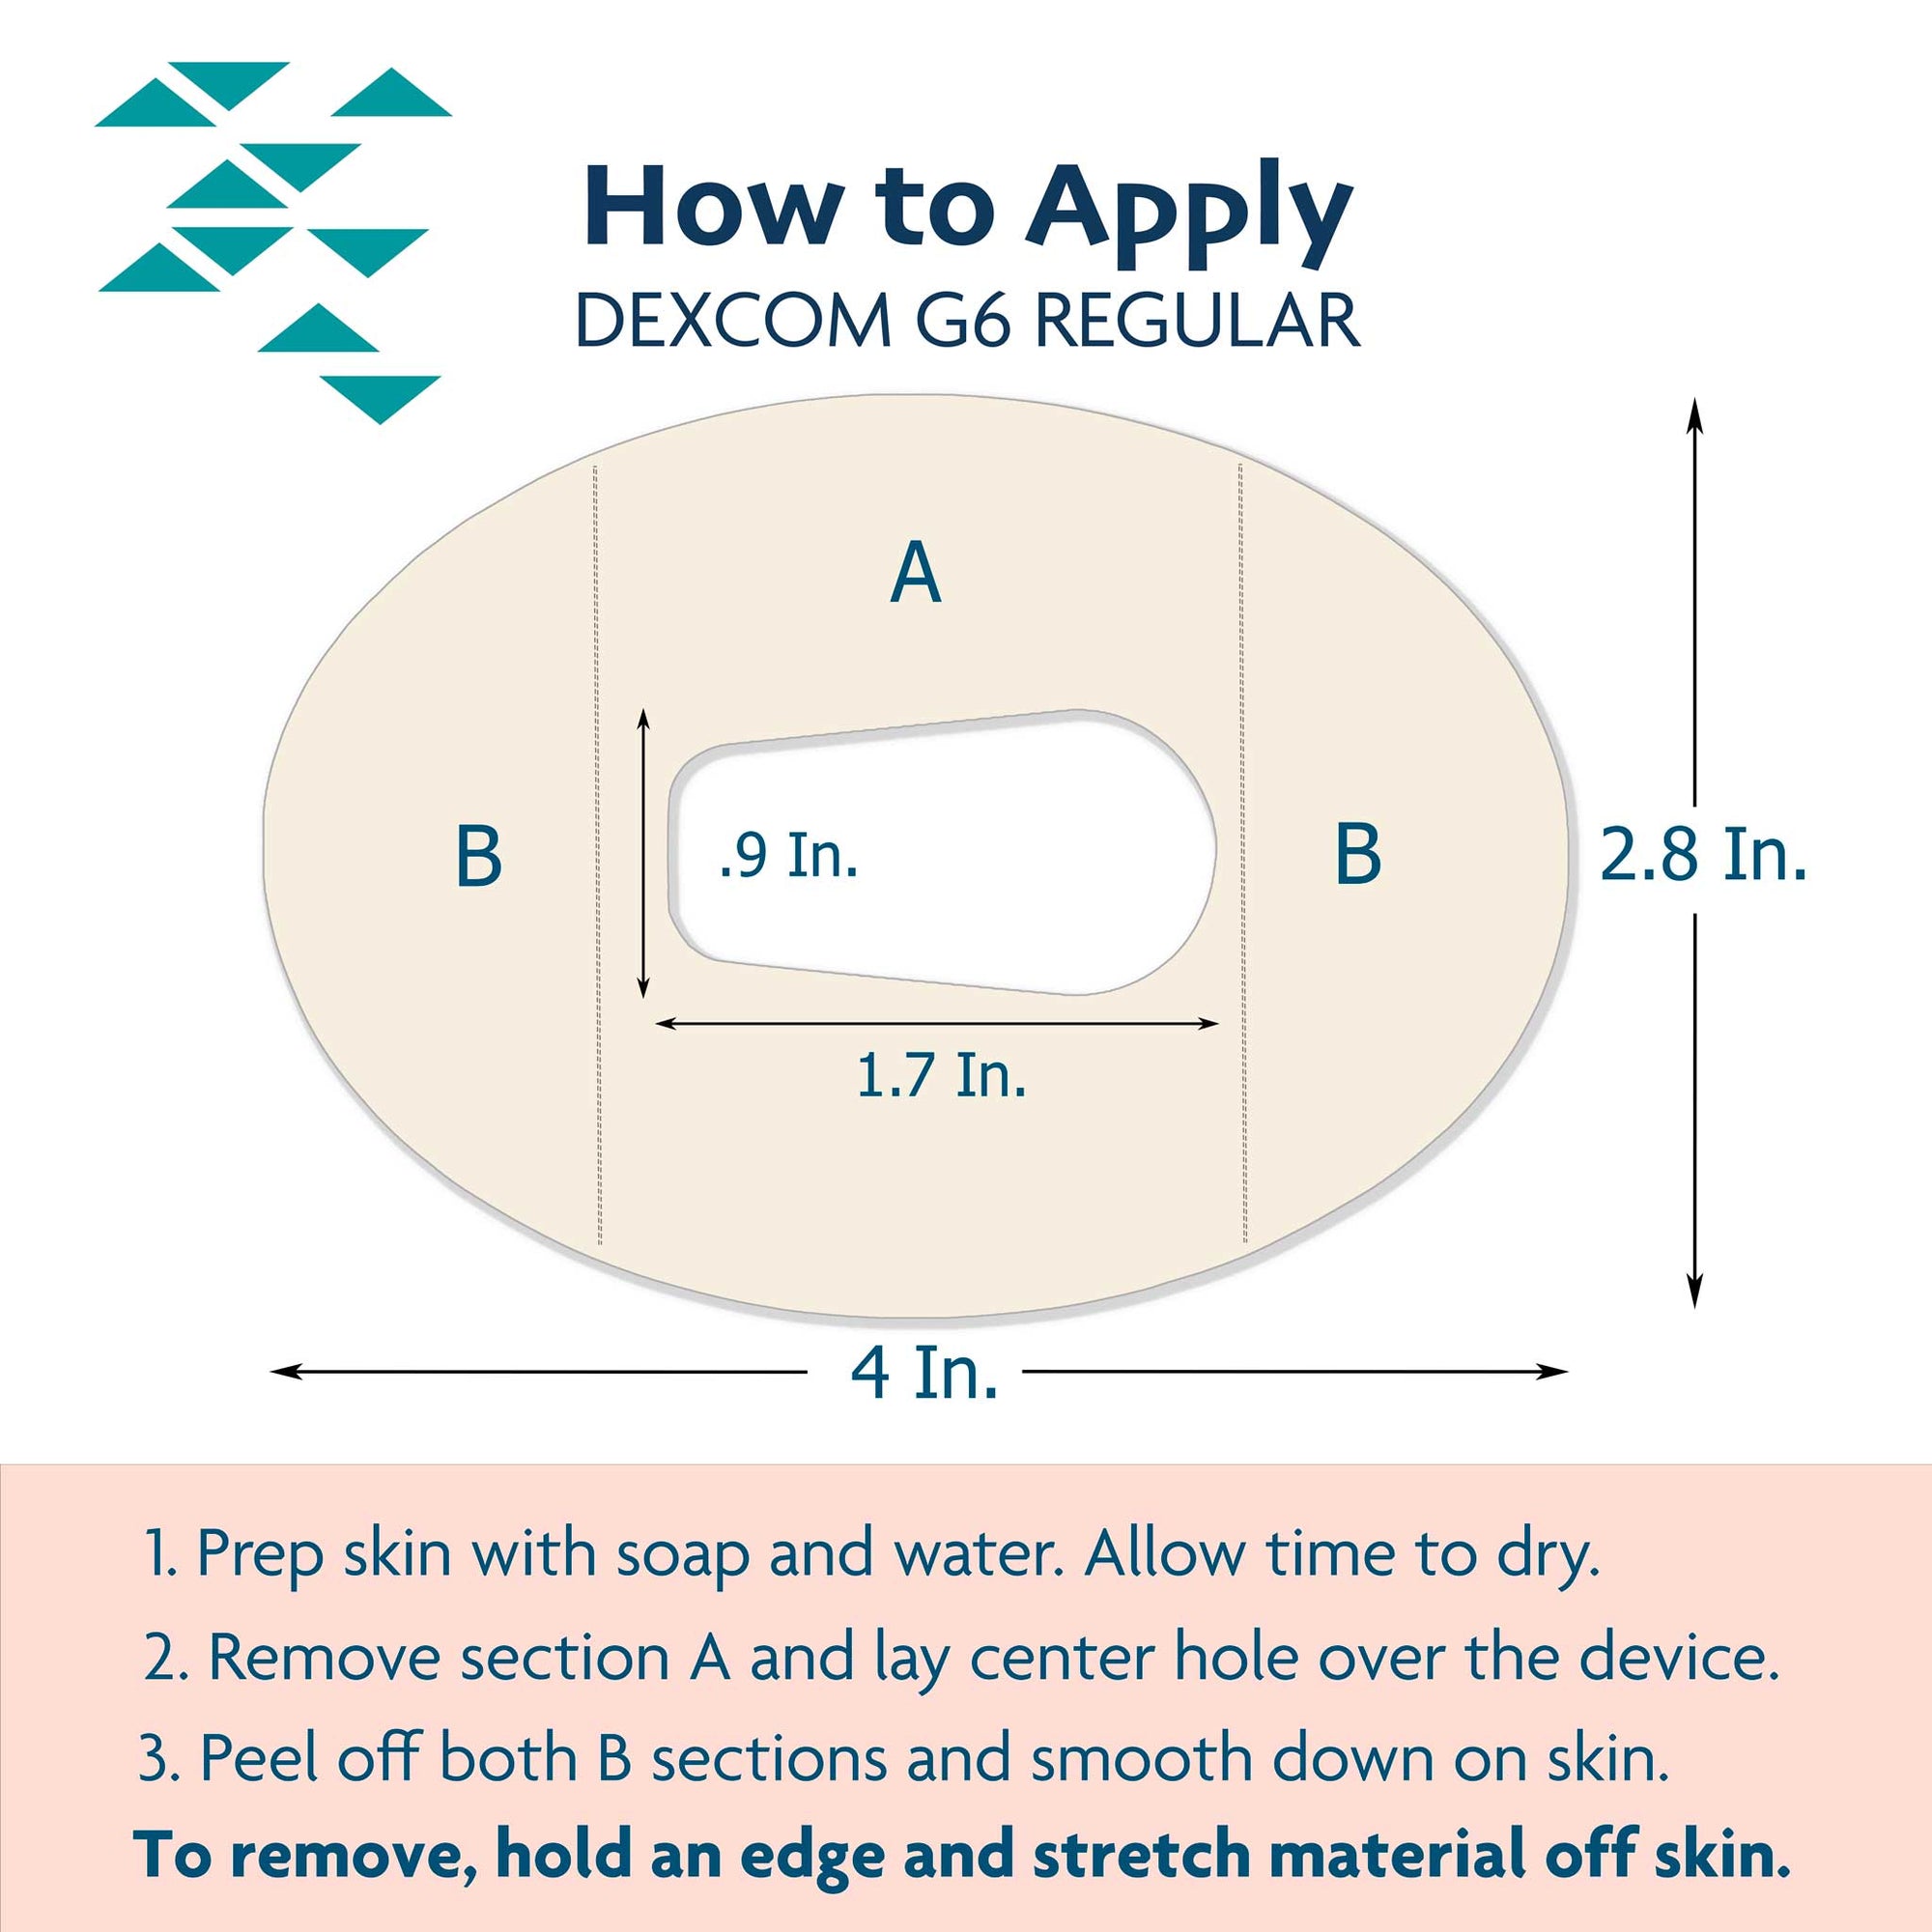 ExpressionMed Dexcom G6 Patch application instructions for CGM proper secure